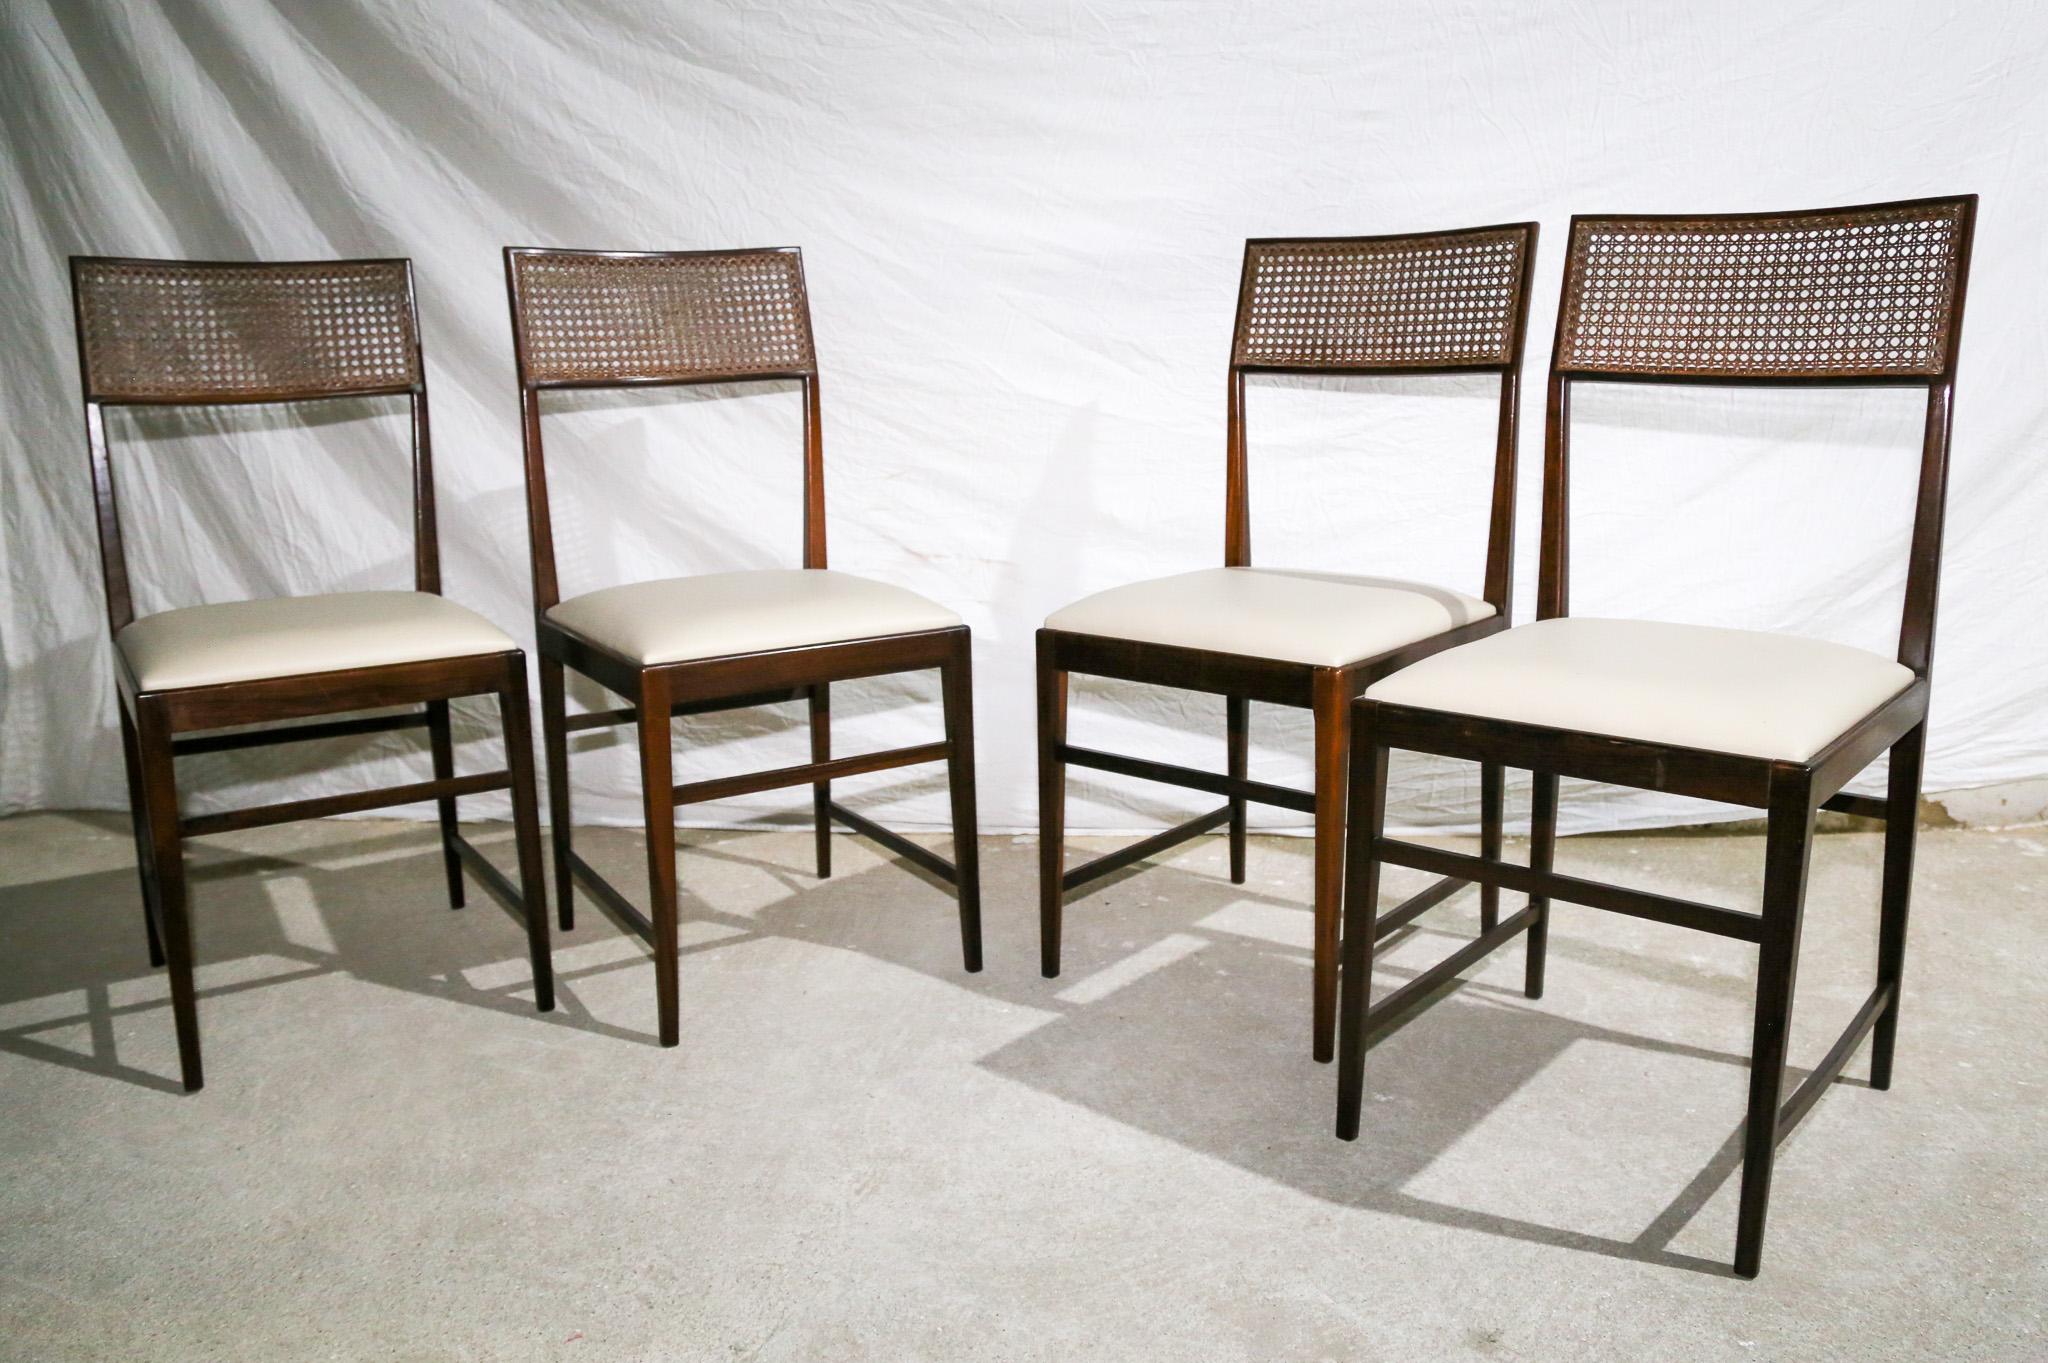 Brazilian Modern 4 Chair Set in Hardwood, Cane, Leather, Joaquim Tenreiro 1950s In Good Condition For Sale In New York, NY